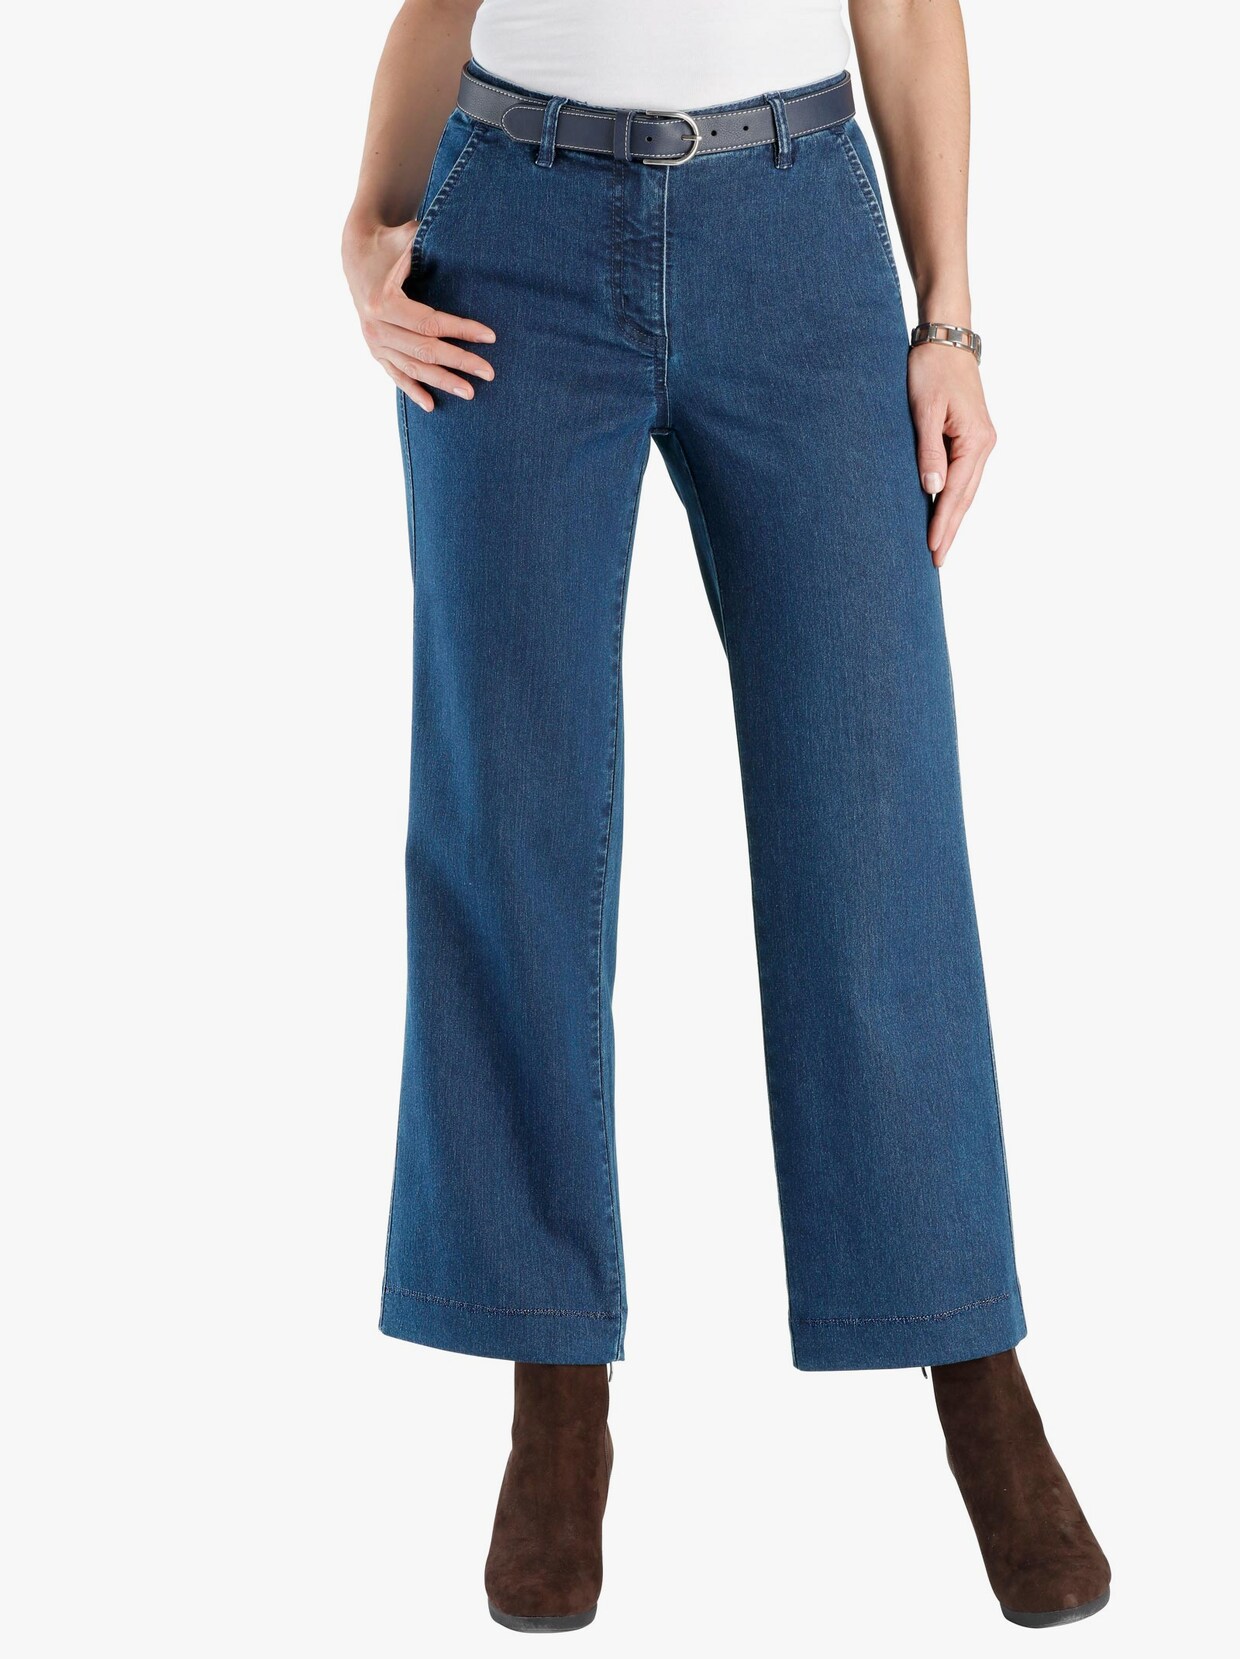 Culotte - blue-stone-washed